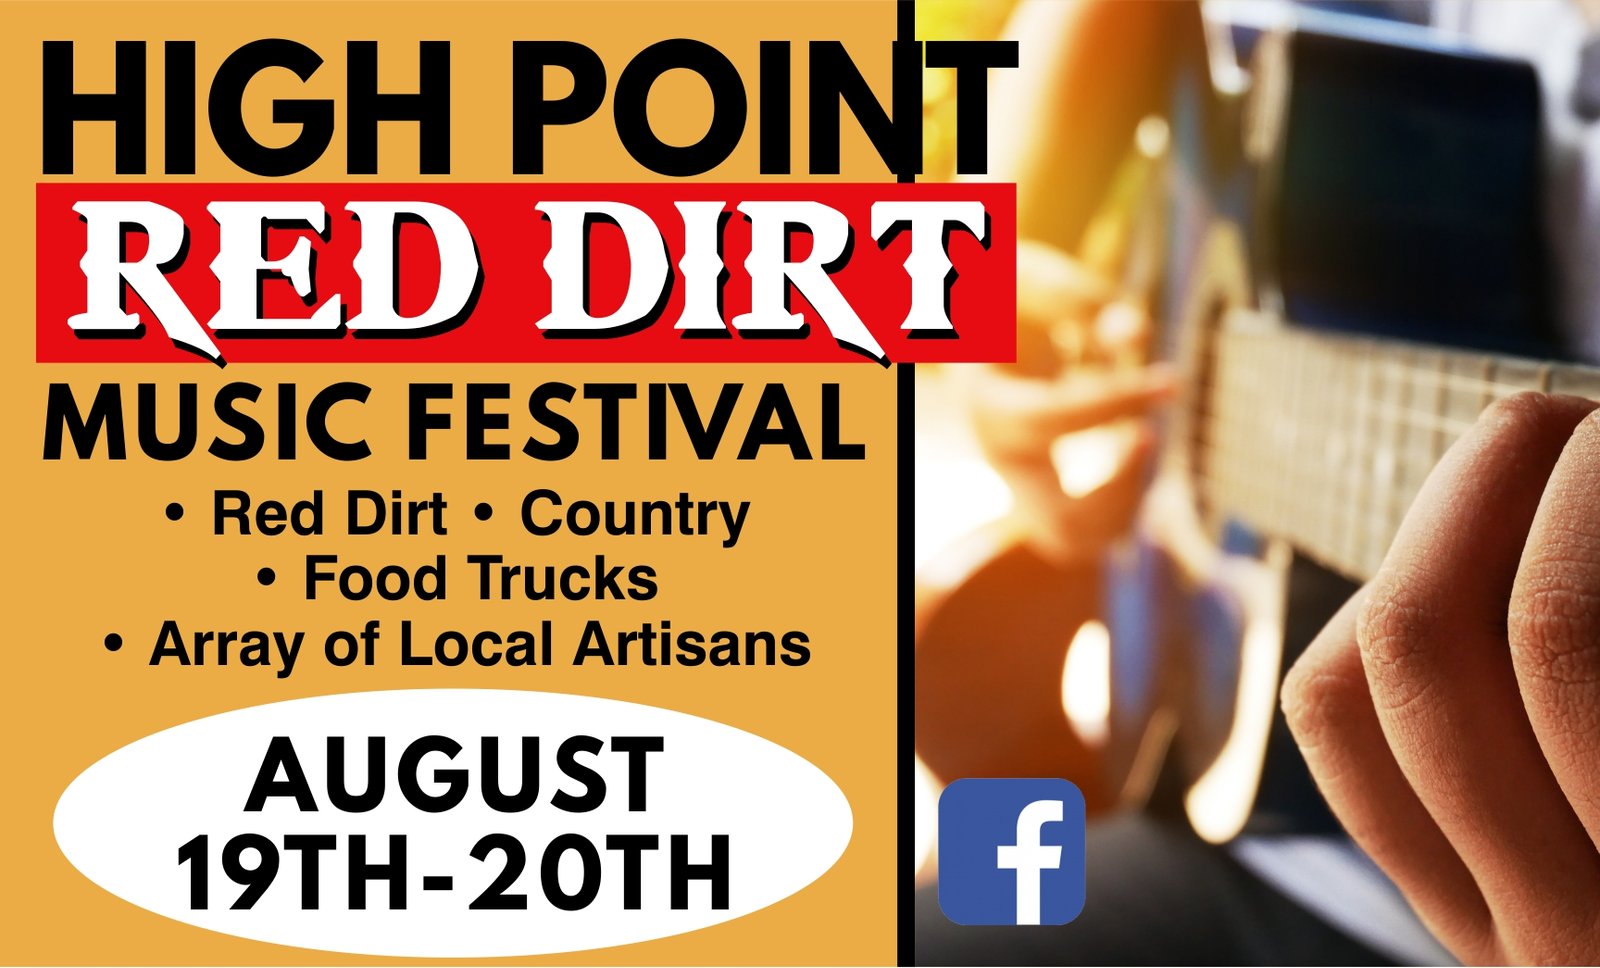 High Point Red Dirt Music Festival LIBERTY FIREWORKS The Brew OKC